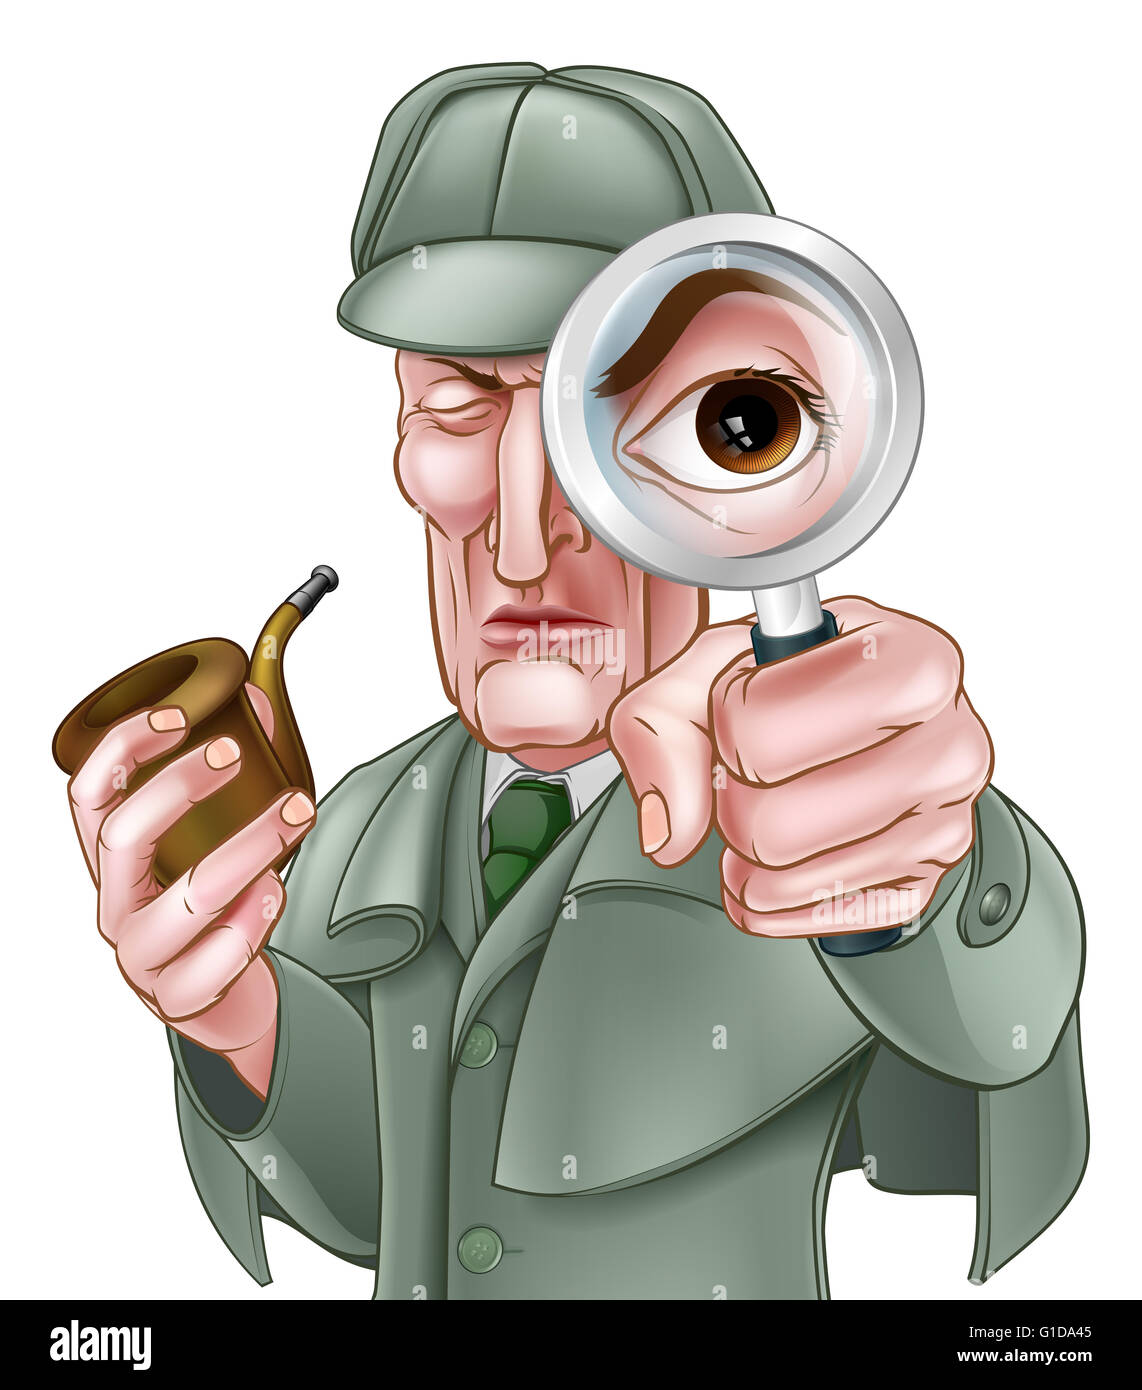 A Sherlock Holmes style Victorian detective cartoon character looking through a magnifying glass Stock Photo